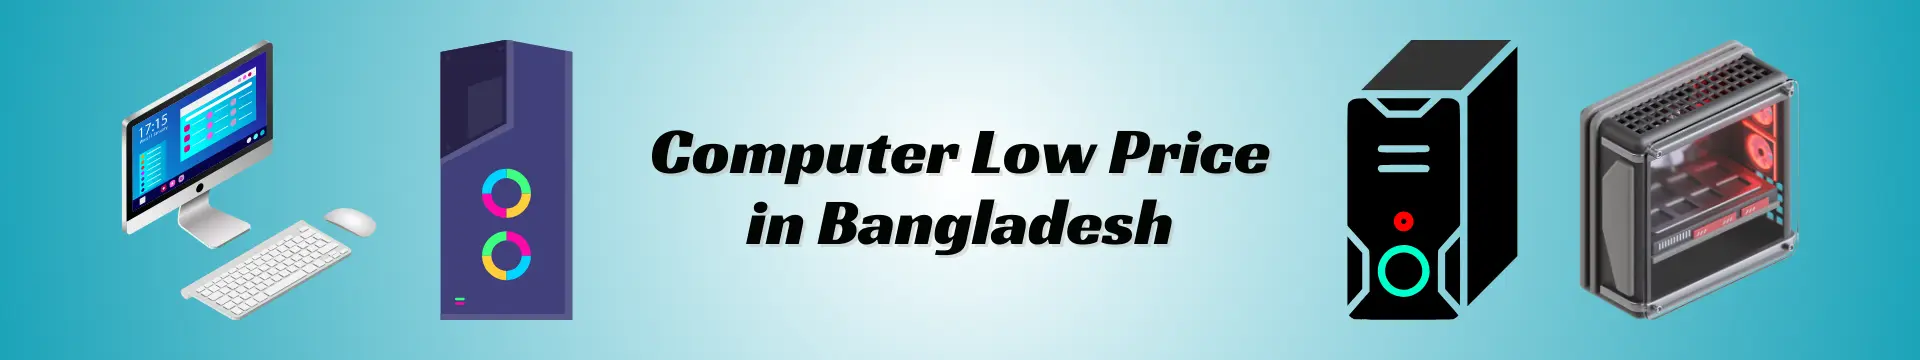 Computer Low Price in Bangladesh